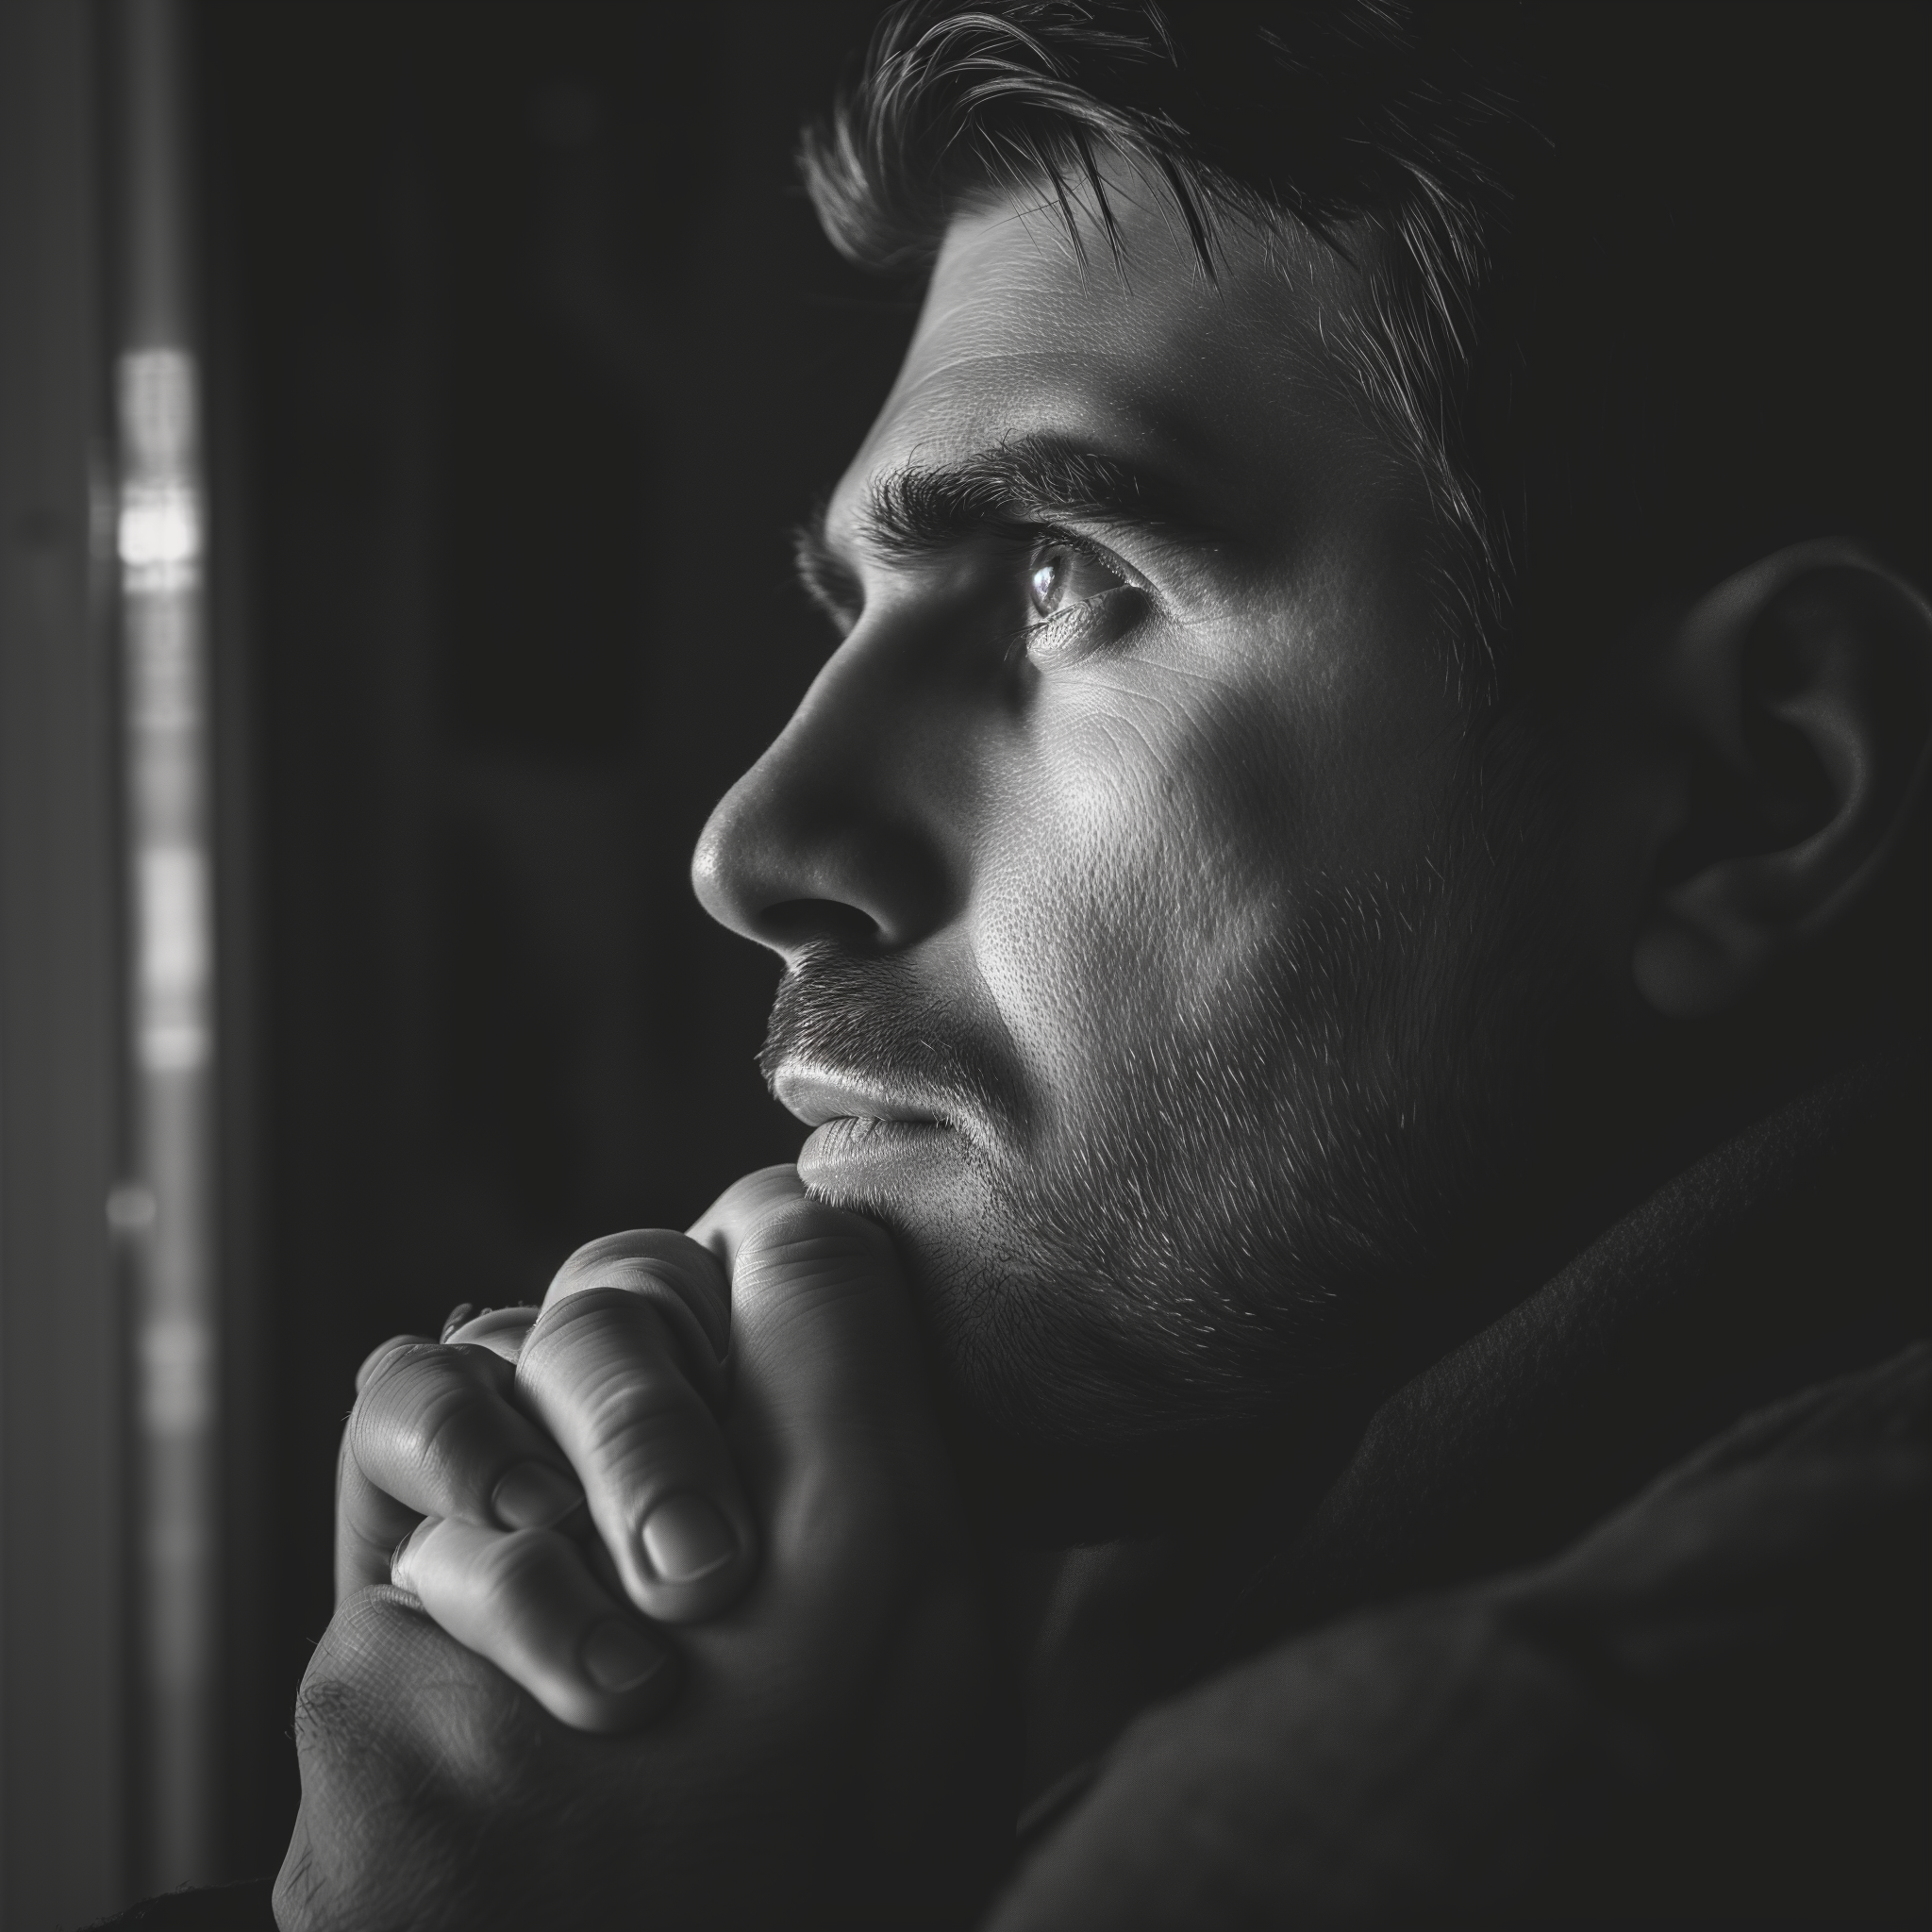 A man deep in thought | Source: Midjourney